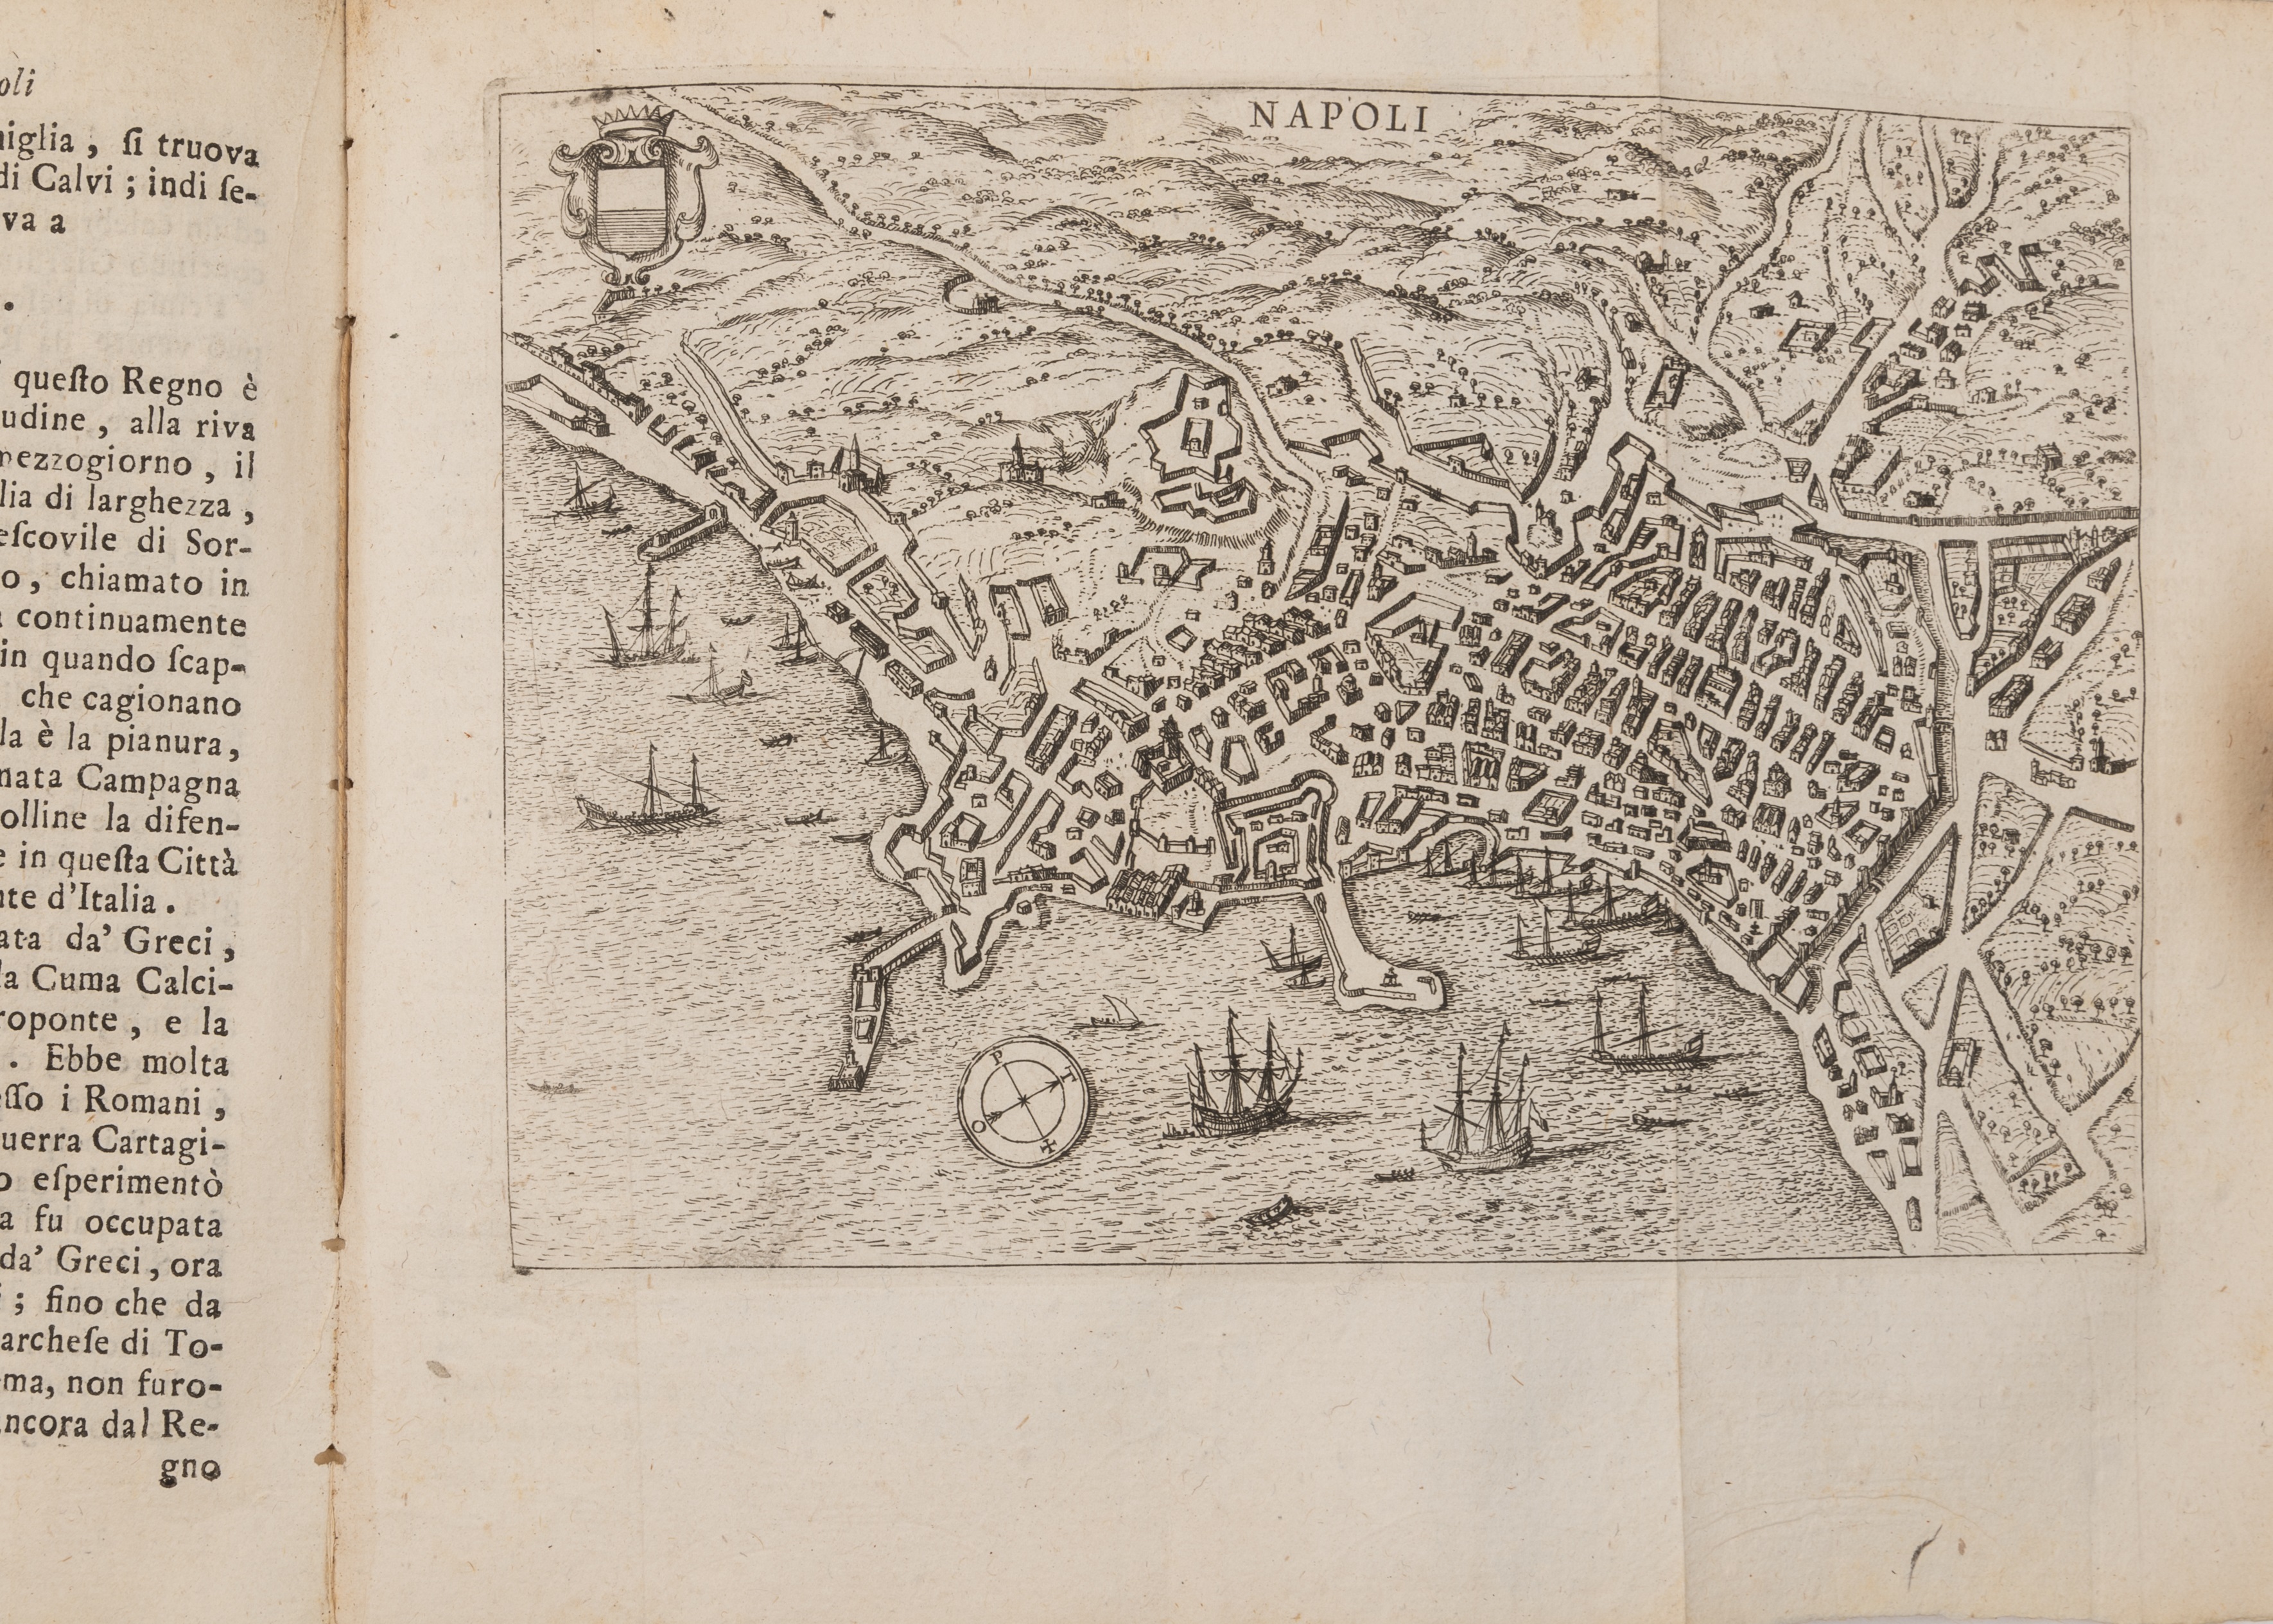 Scotto (Francesco) Itinerario. D'Italia, Fausto Amidei, Rome 1761. 3 pts in one. 404pp with colophon - Image 4 of 4